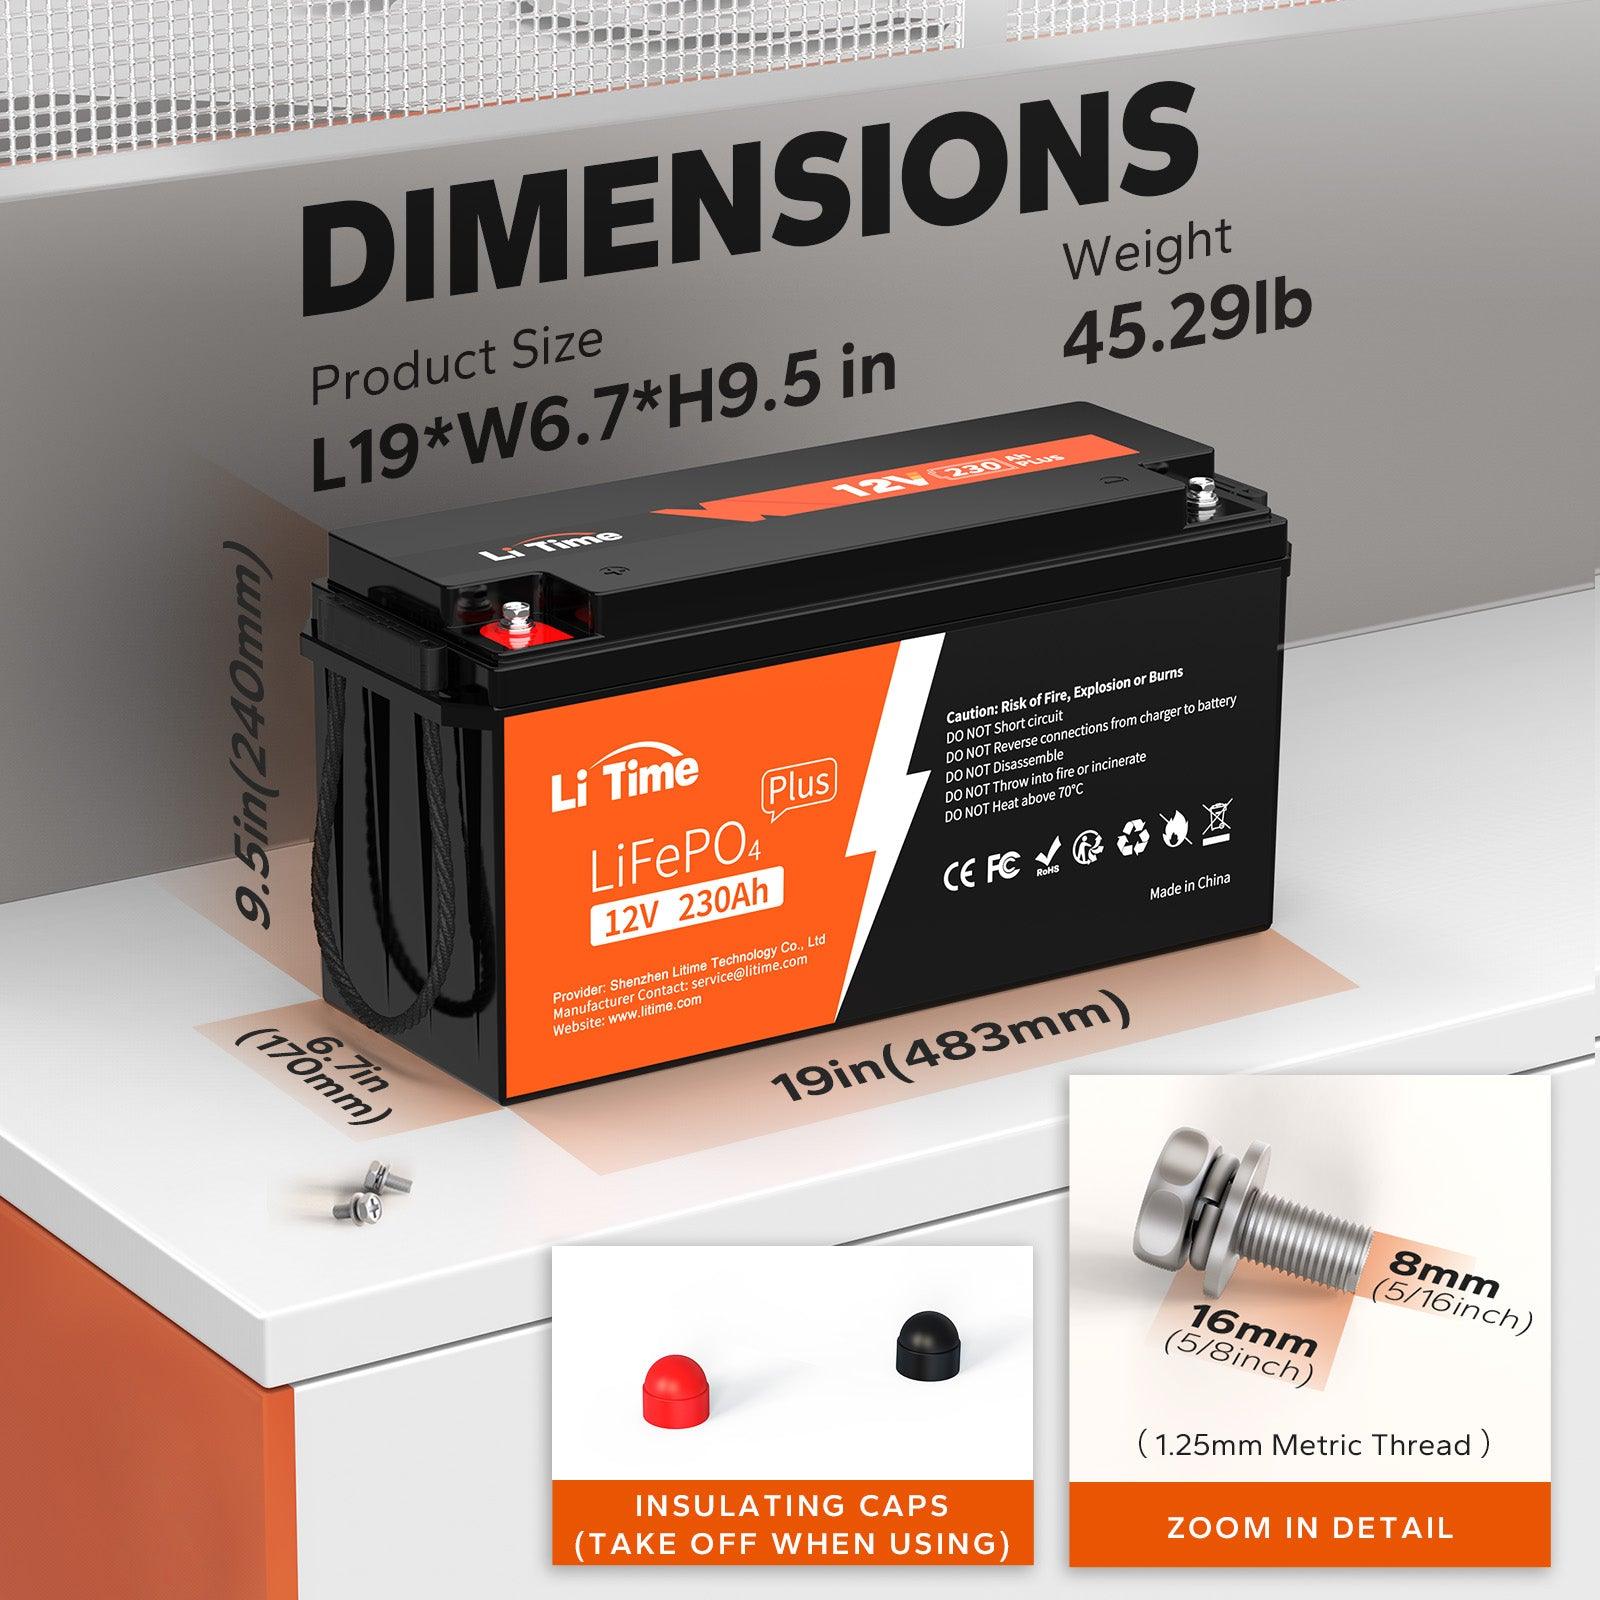 LiTime 12V 230Ah Plus LiFePO4 Battery, Built-in 200A BMS, Max 2944Wh Energy - LiTime